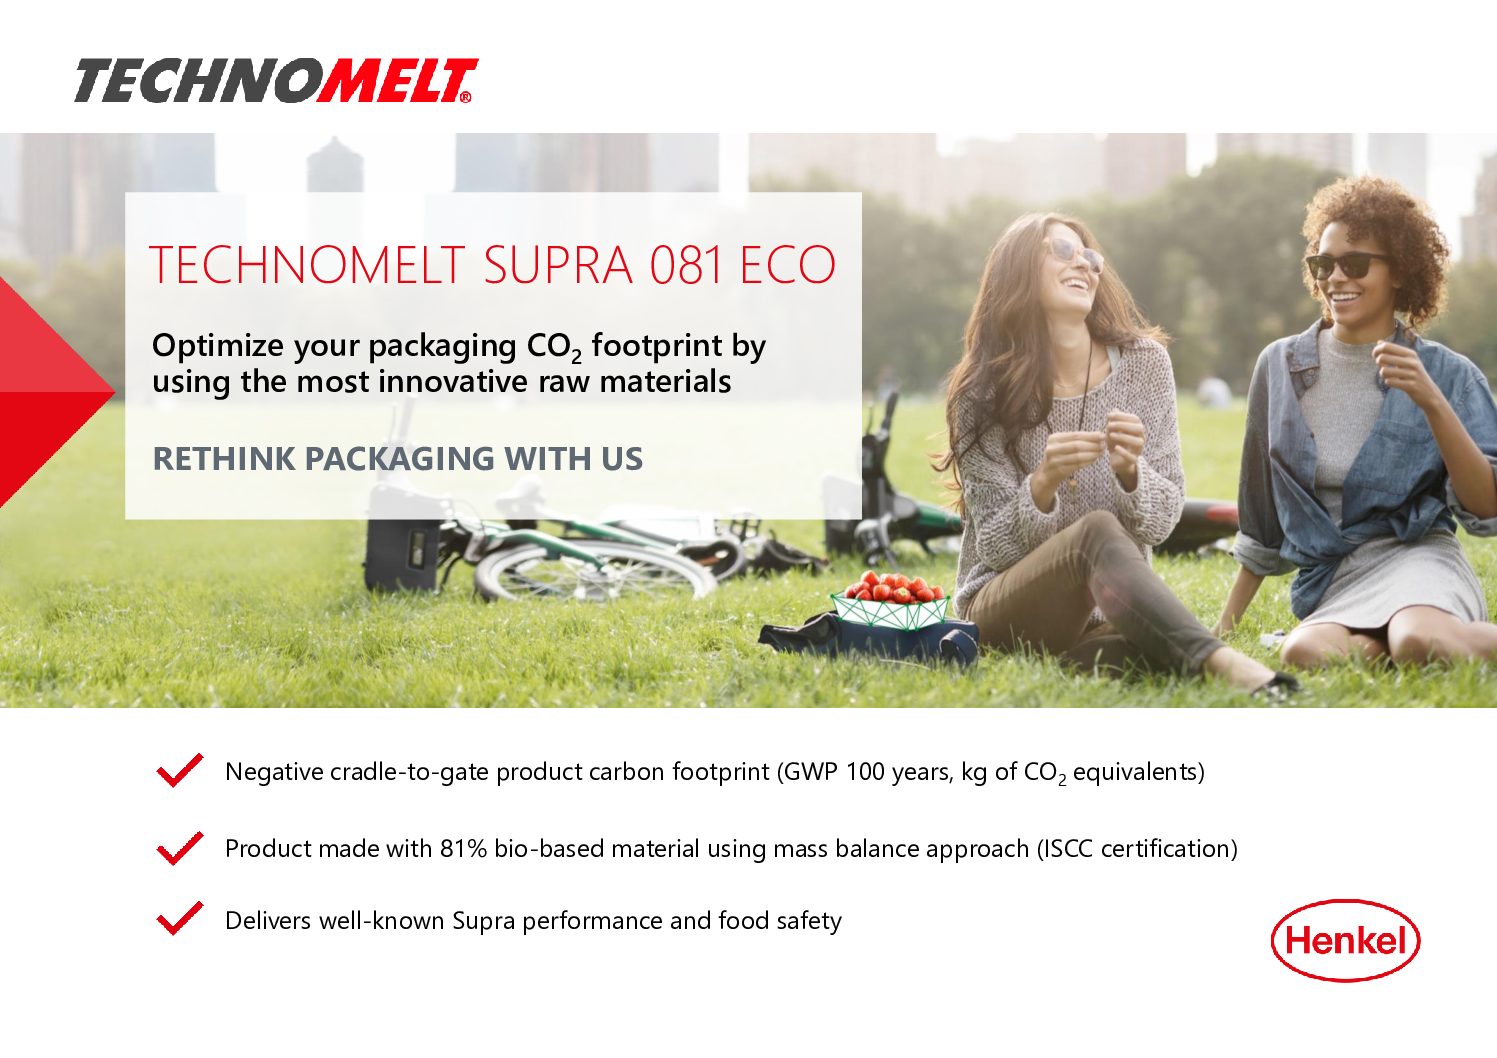 Technomelt Supra 081 ECO – Reducing your Carbon Footprint